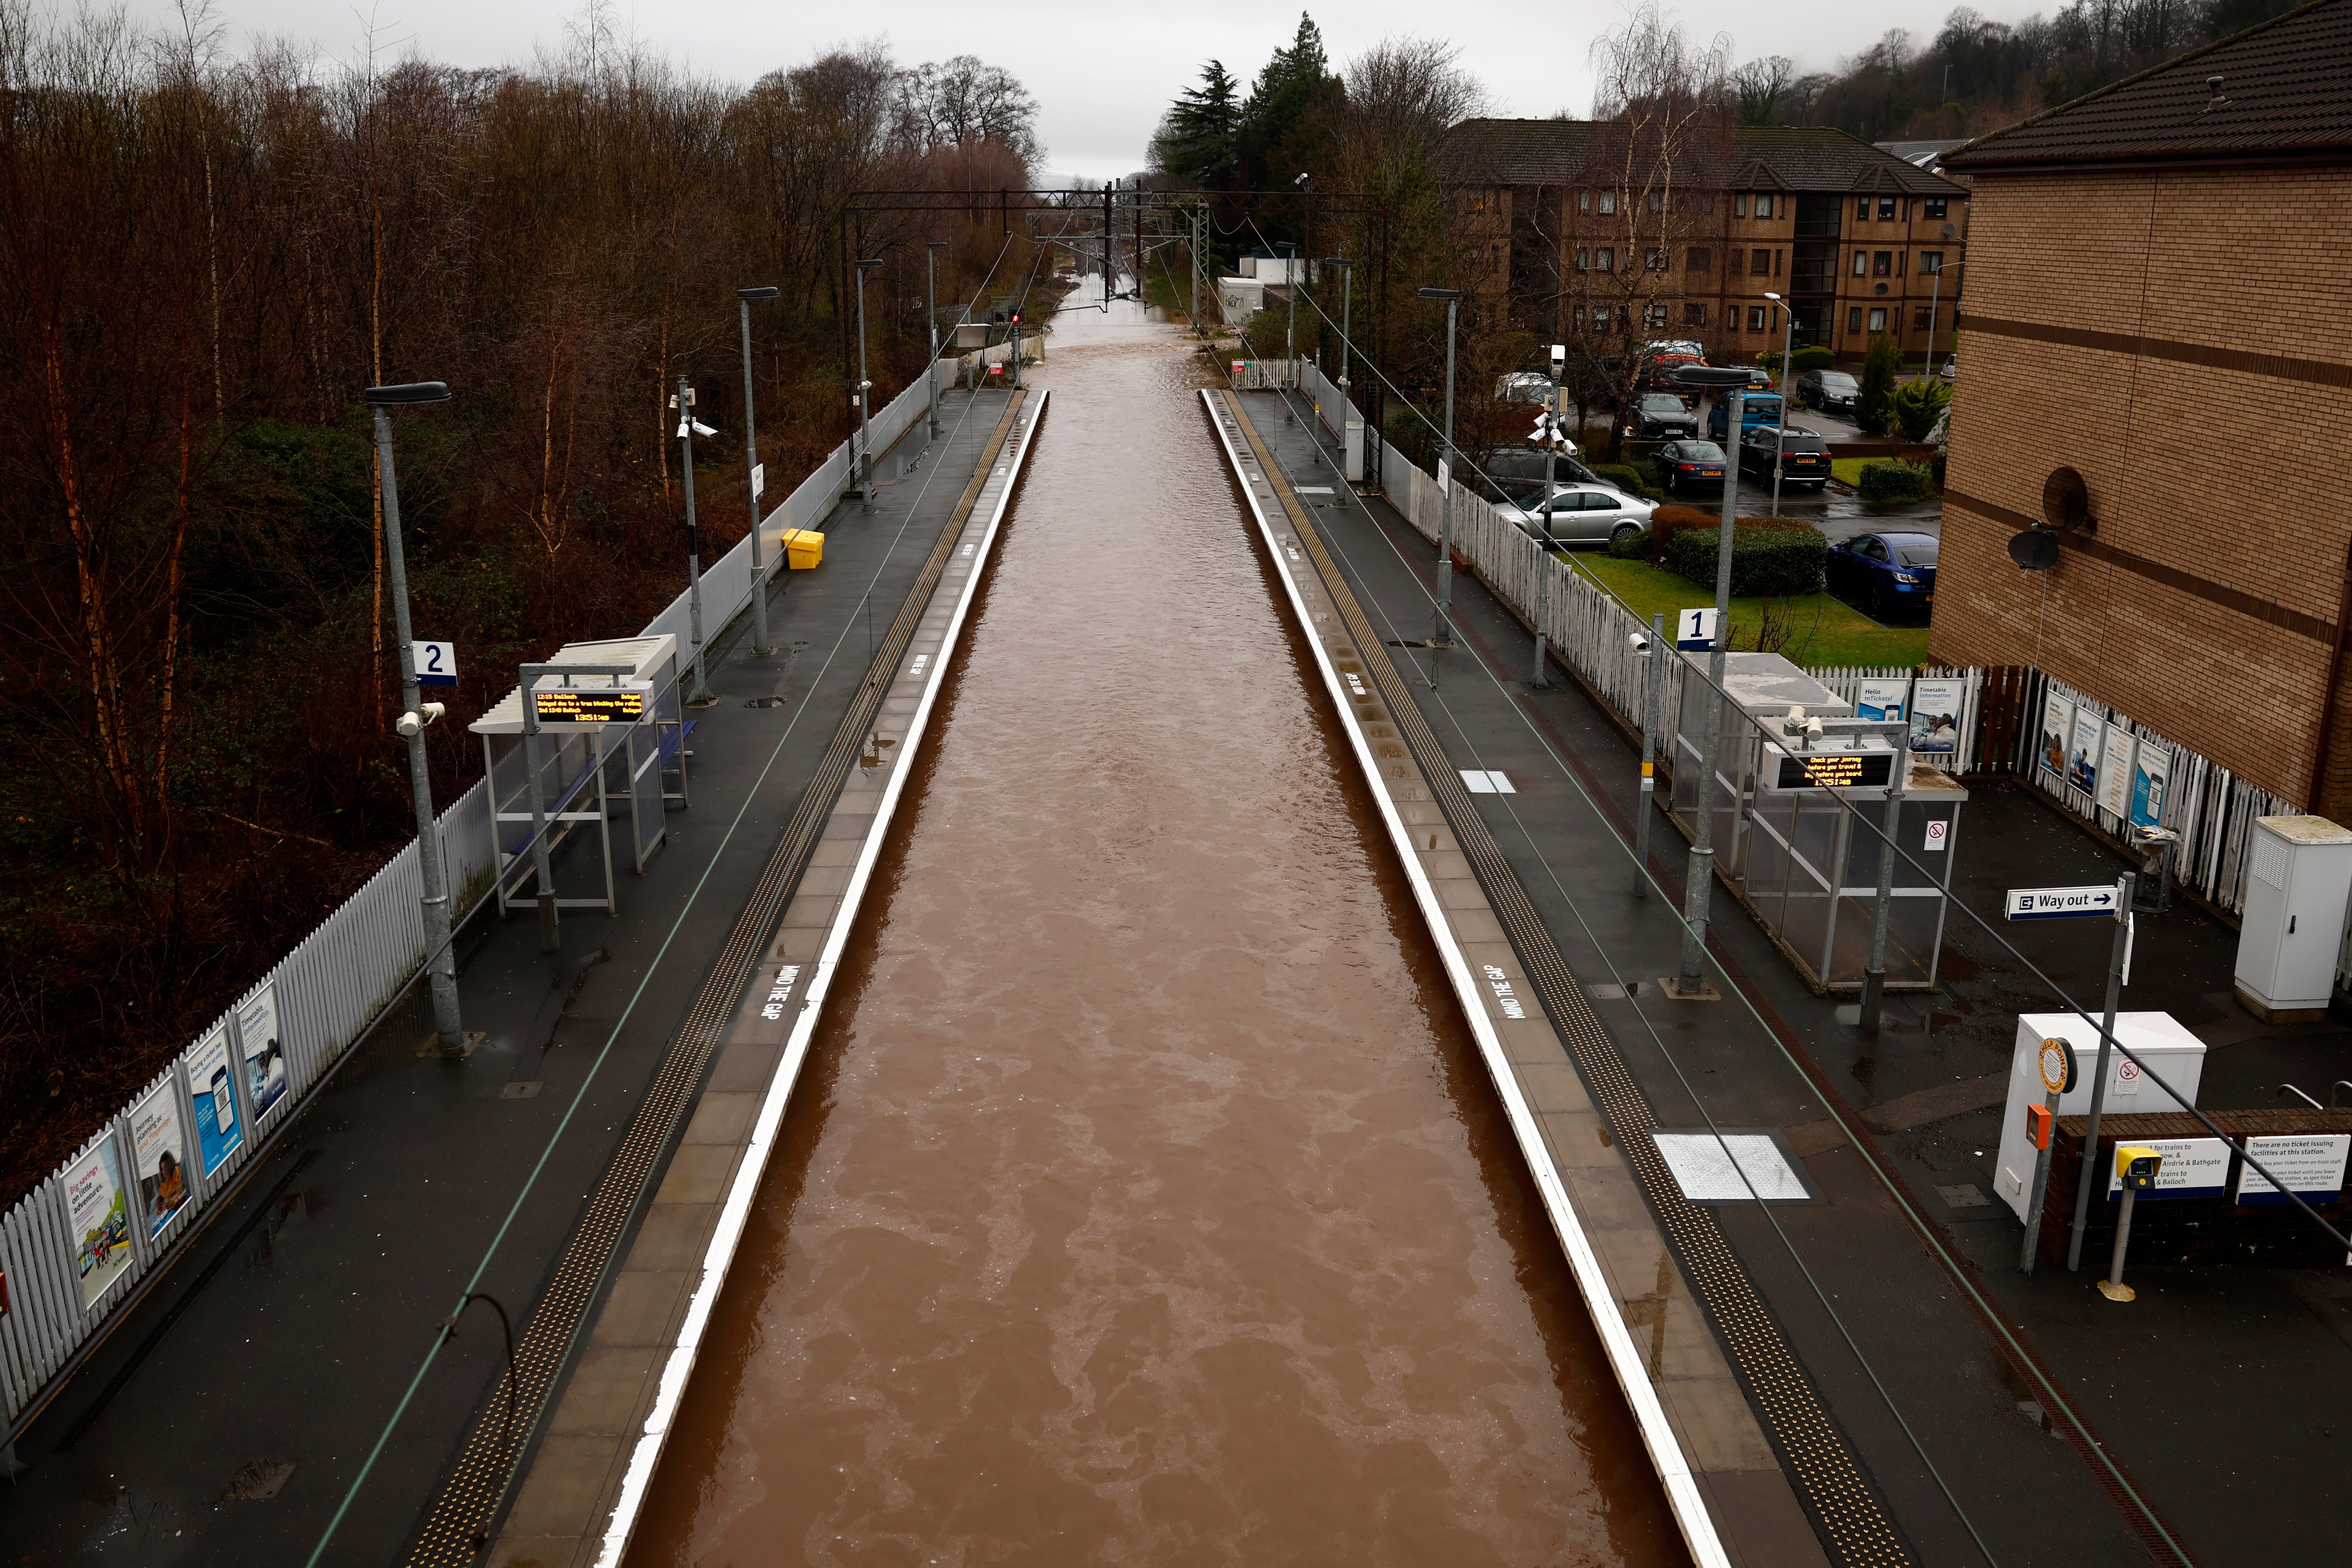 pThe tracks at Bowling train station were completely submerged by floodwaters /p